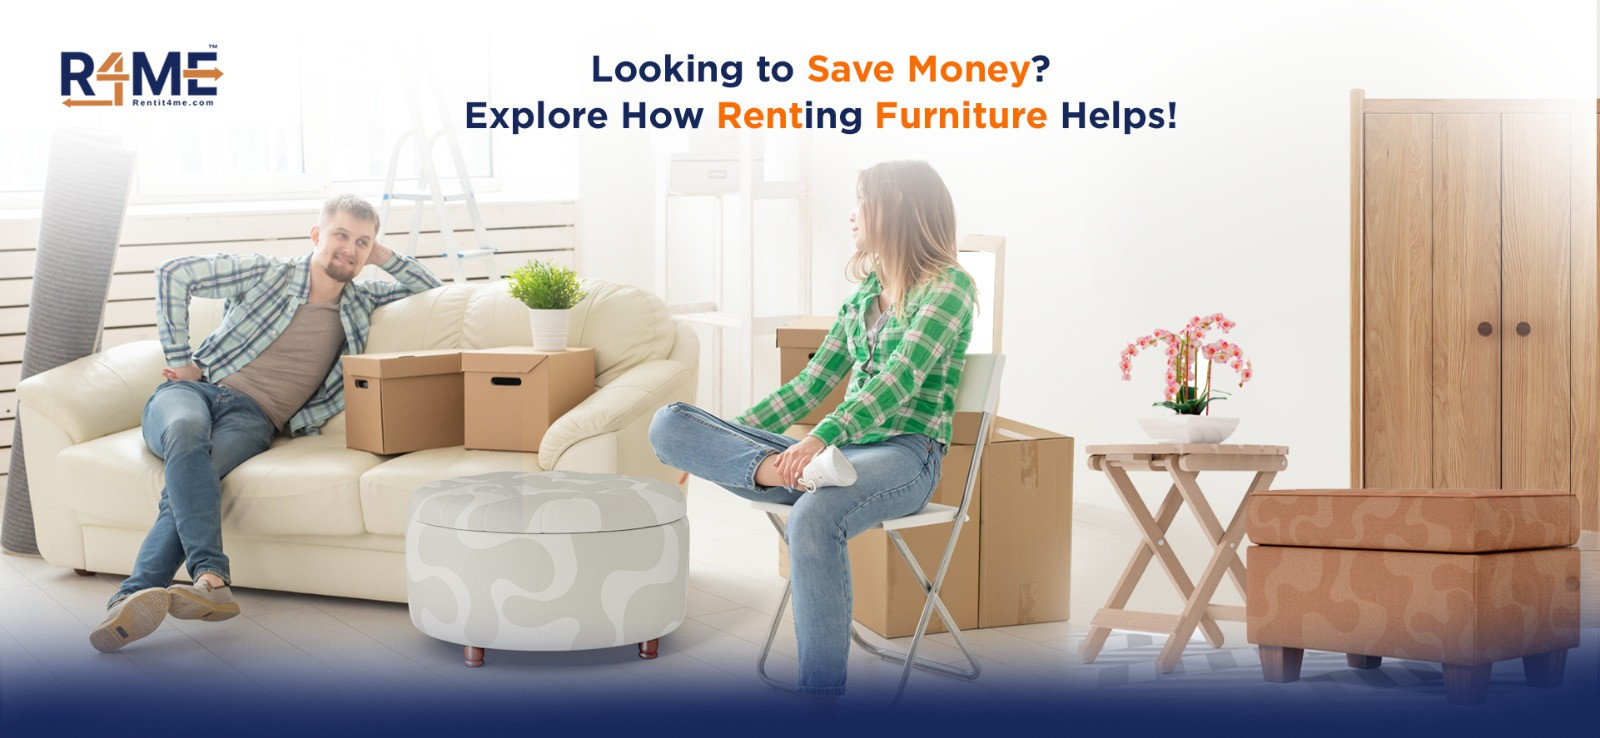 Looking to Save Money? Explore How Renting Furniture Help?